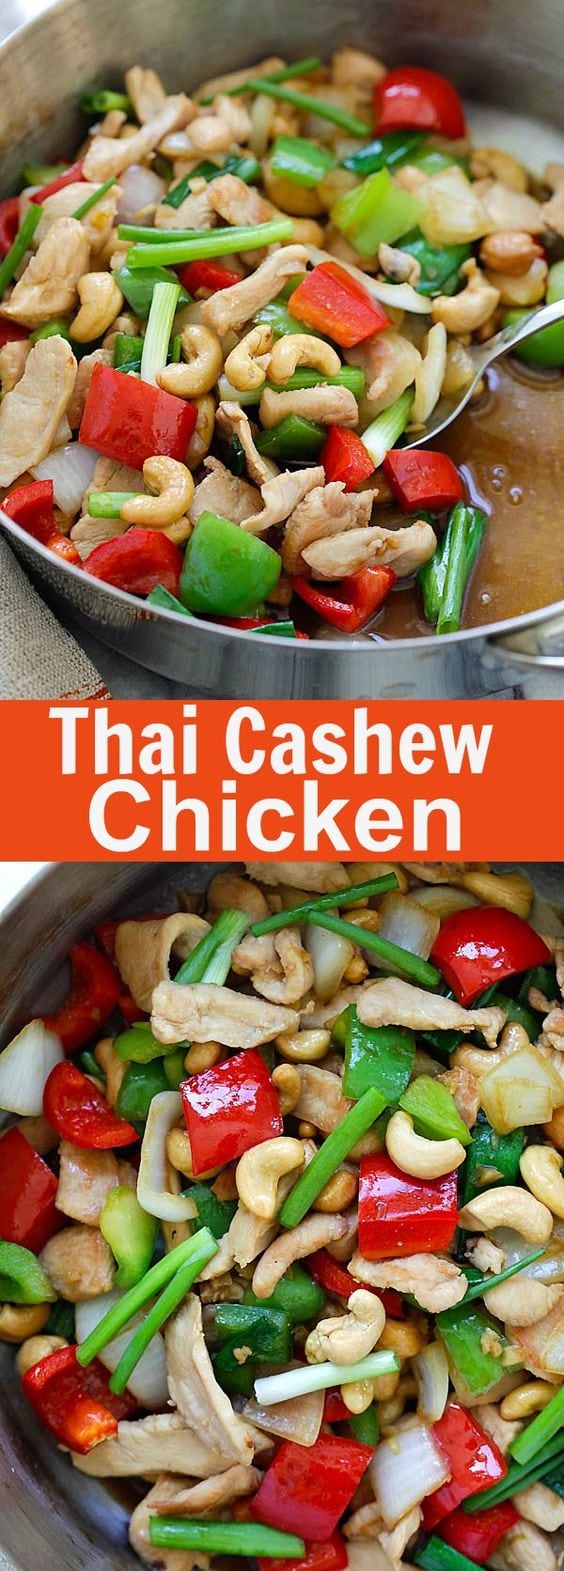 Thai Cashew Chicken - best Thai chicken stir-fry with cashew nuts and bell peppers. So easy to make, takes 20 mins and much better than restaurants | rasamalaysia.com